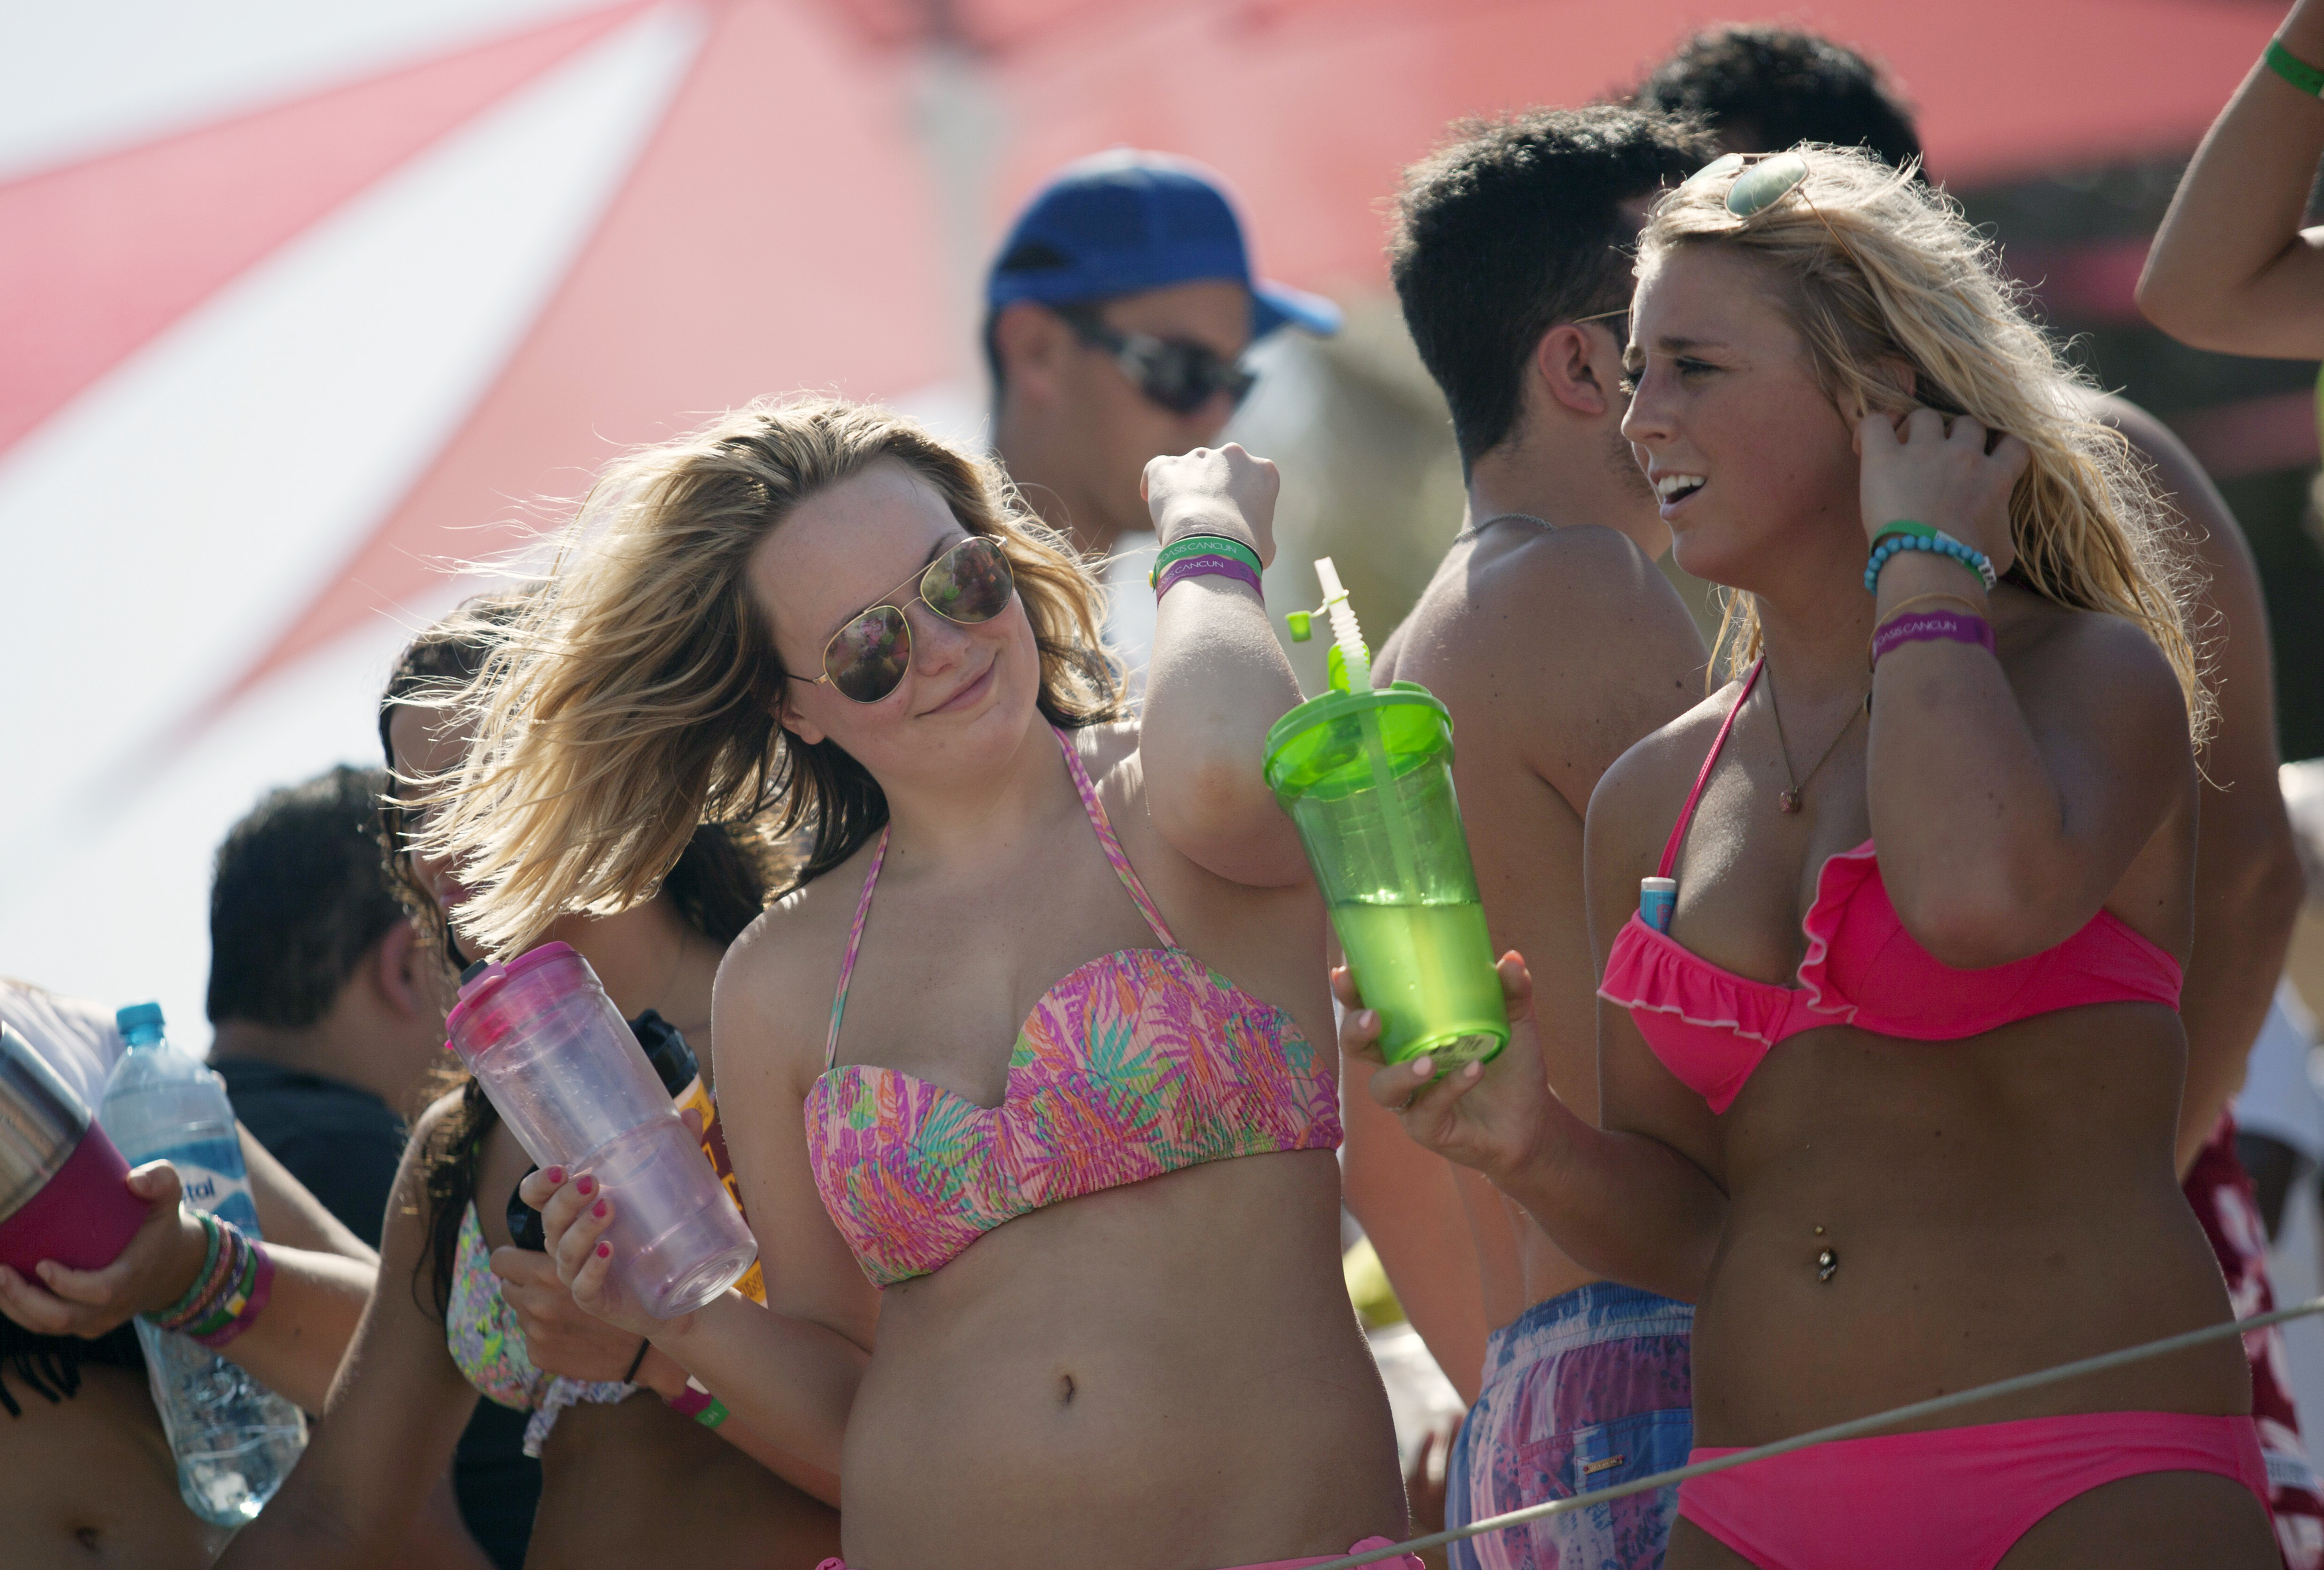 Spring breakers gather at a pool party at a hotel in Cancun March 14, 2015. Florida has long struggled with the crowds of rowdy students embracing its sun, sea and party life in March and April. Fort Lauderdale announced on television in 1985 that spring breakers were no longer welcome after 350,000 students took nudity and drinking to new heights. Picture taken March 14, 2015. REUTERS/Victor Ruiz Garcia 